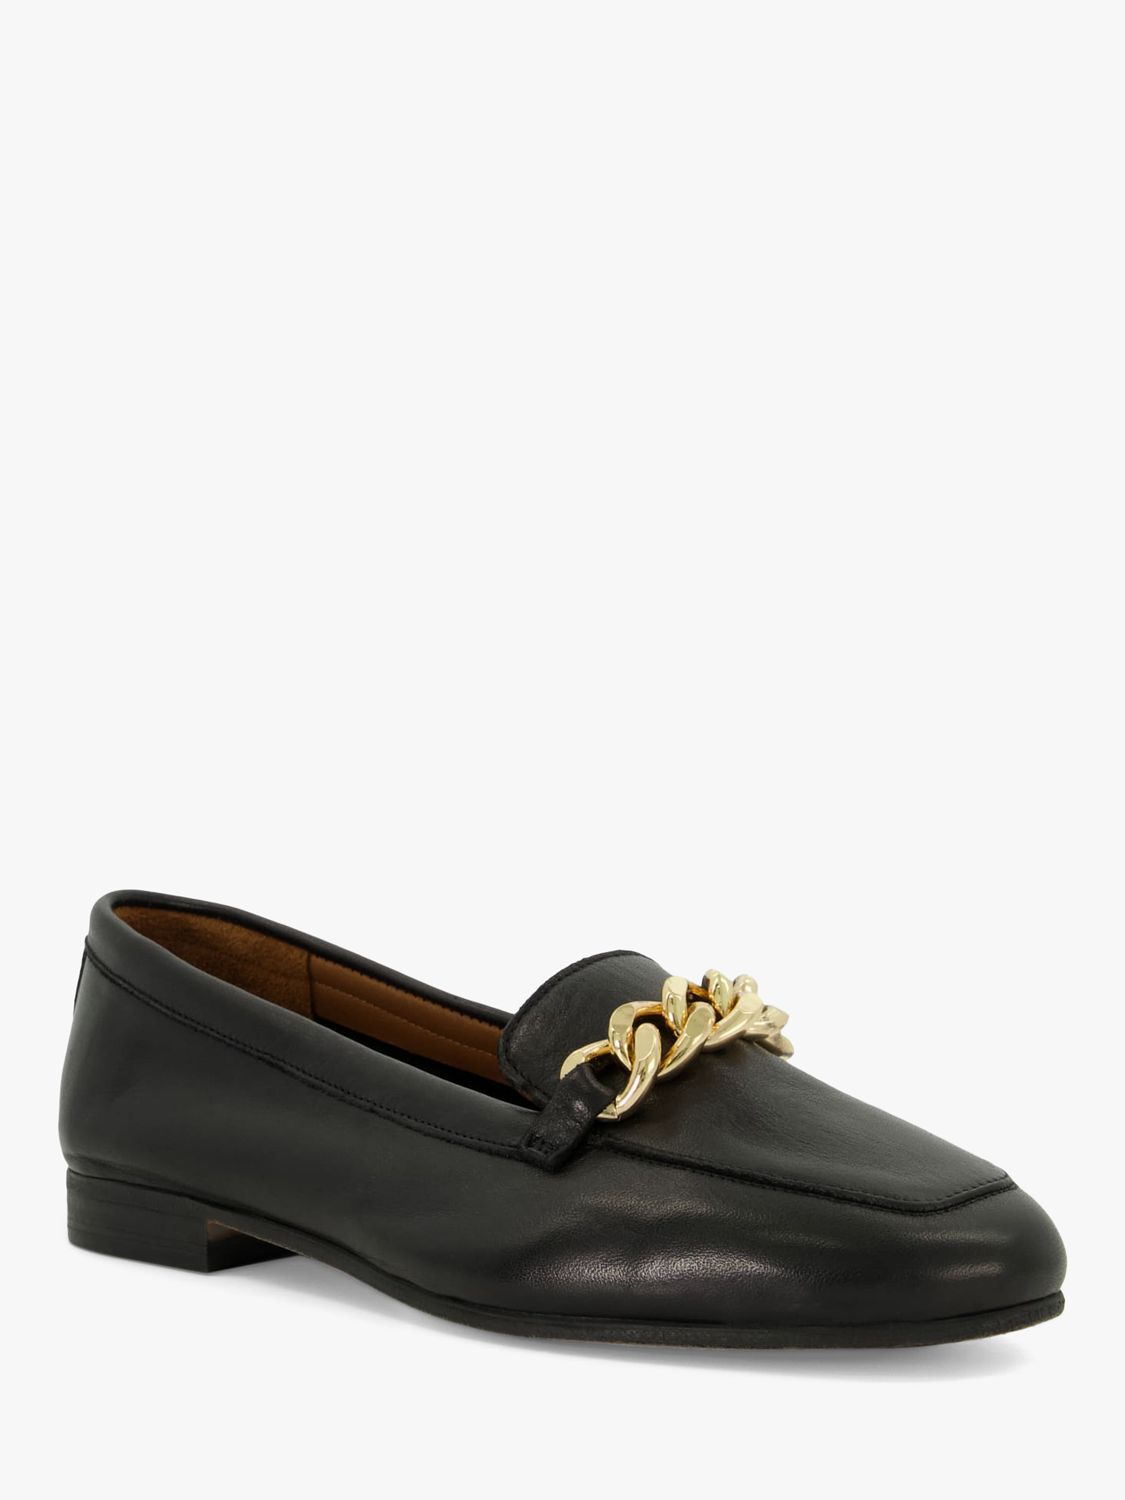 Buy Dune Goldsmith Wide Fit Leather Chain Detail Loafers, Black Online at johnlewis.com